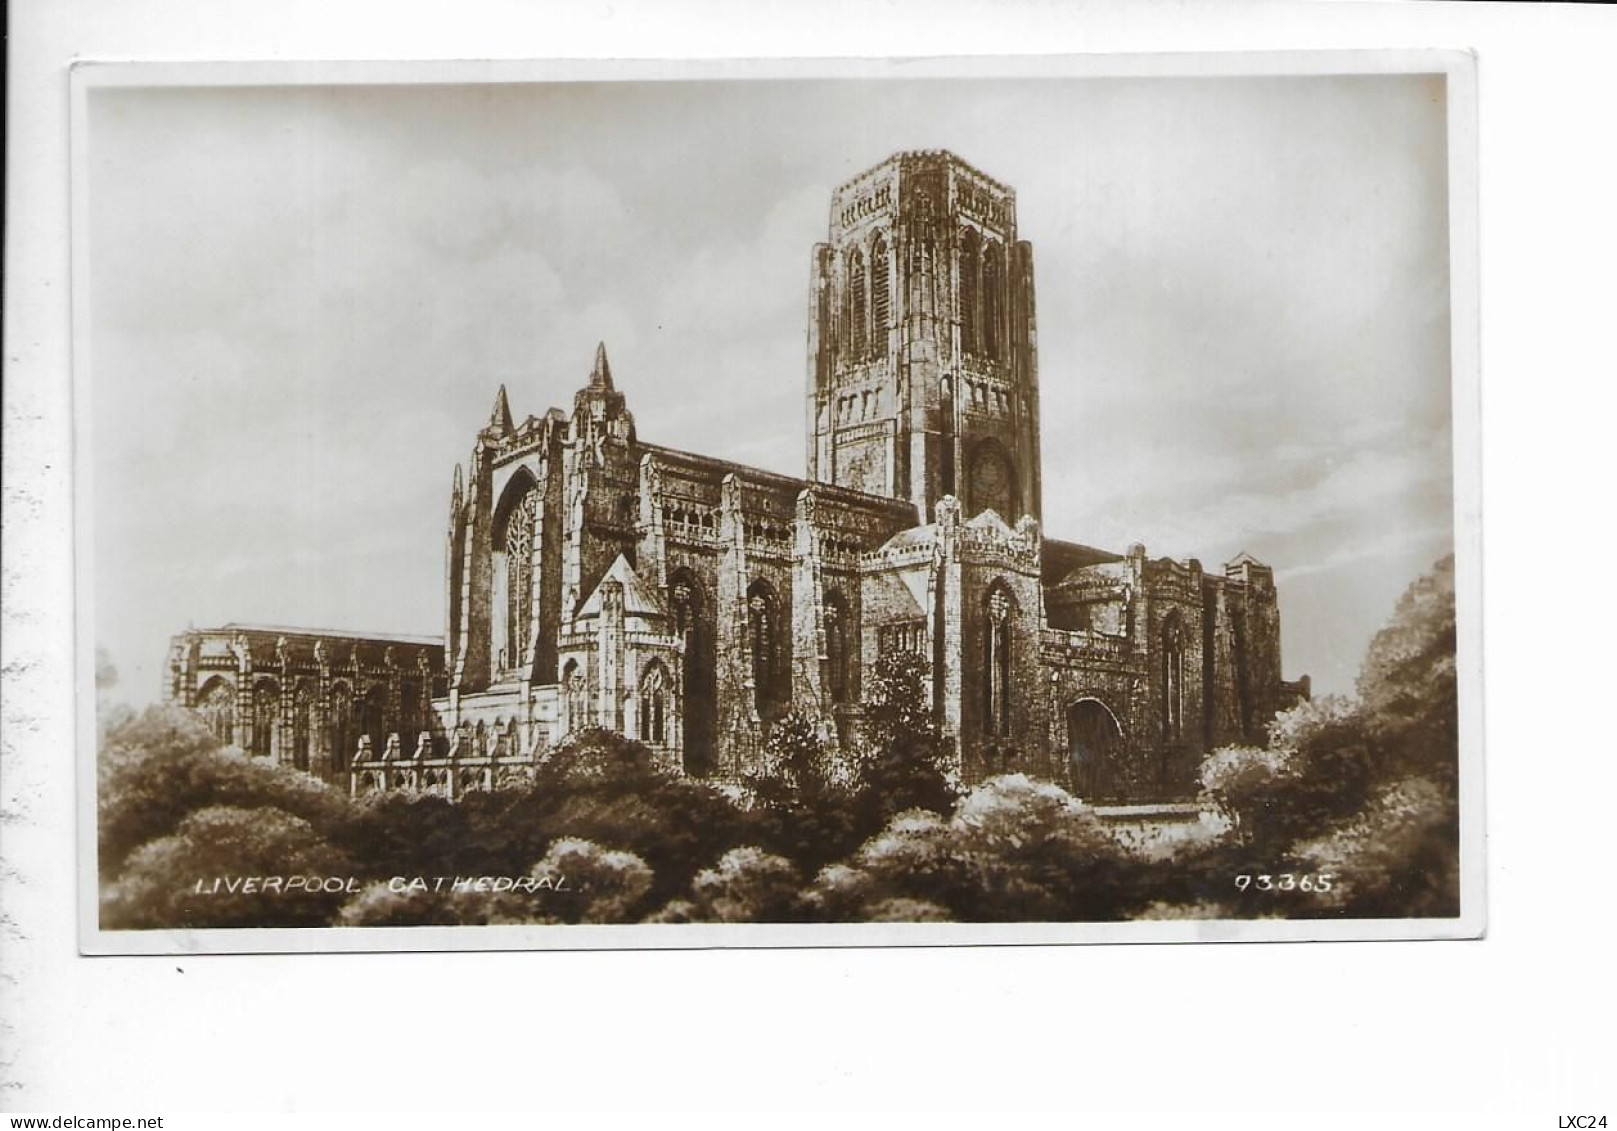 LIVERPOOL CATHEDRAL. - Liverpool